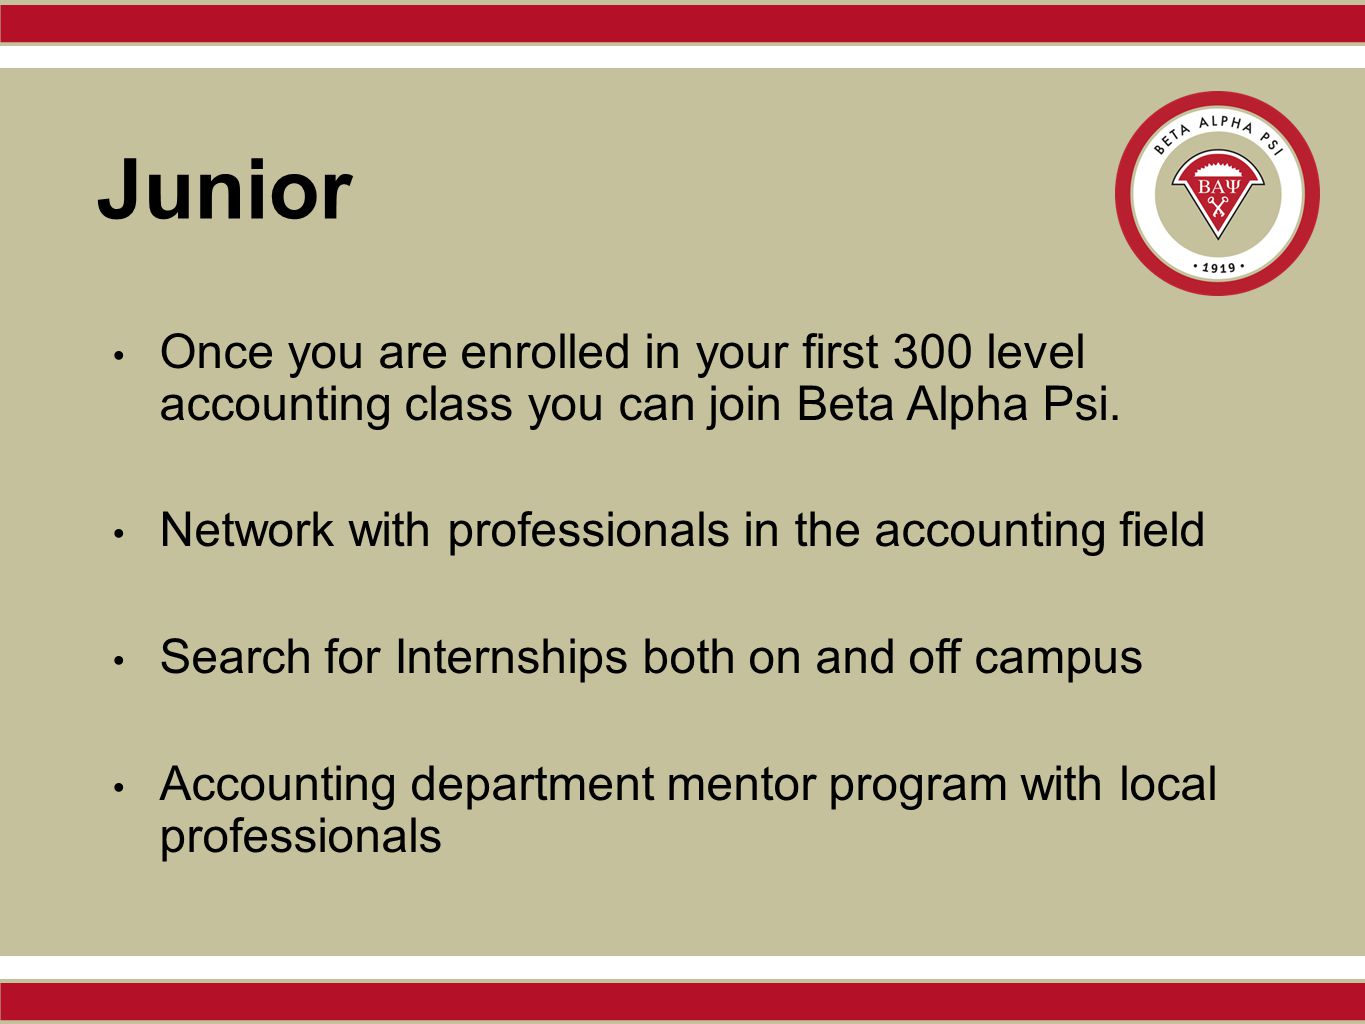 Junior Once you are enrolled in your first 300 level accounting class you can join Beta Alpha Psi.